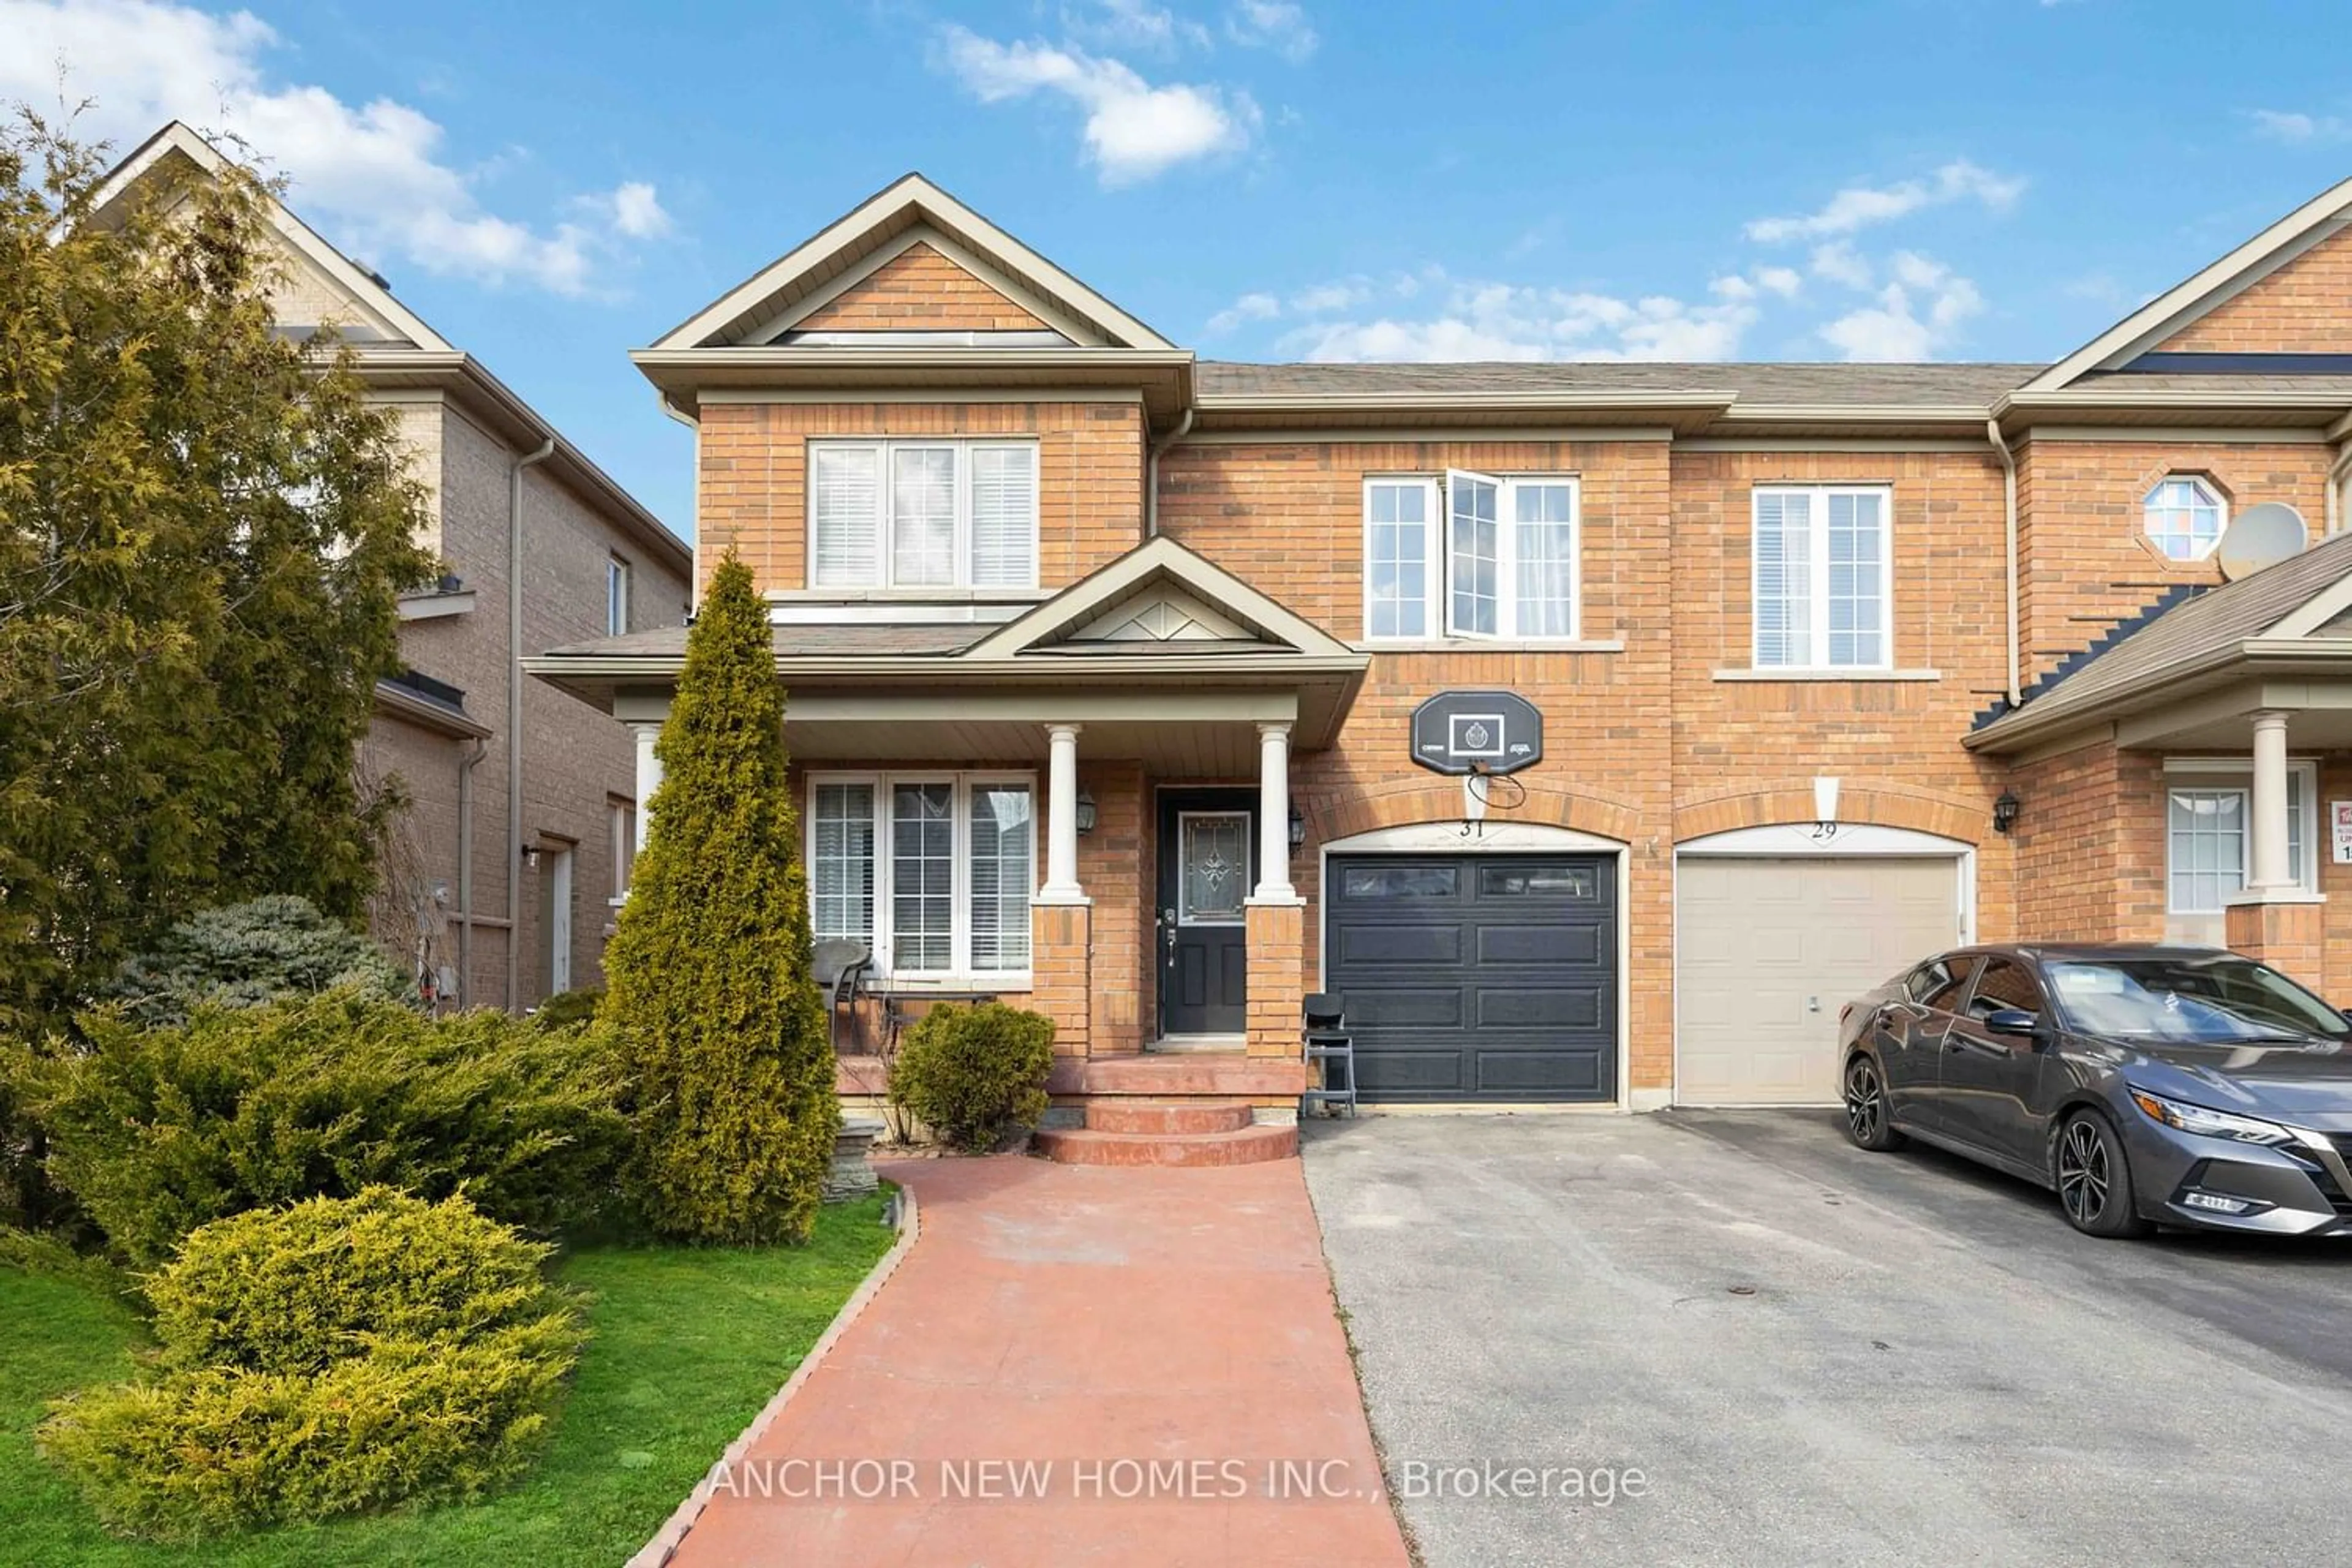 Home with brick exterior material for 31 Quailvalley Dr, Brampton Ontario L6R 0N4